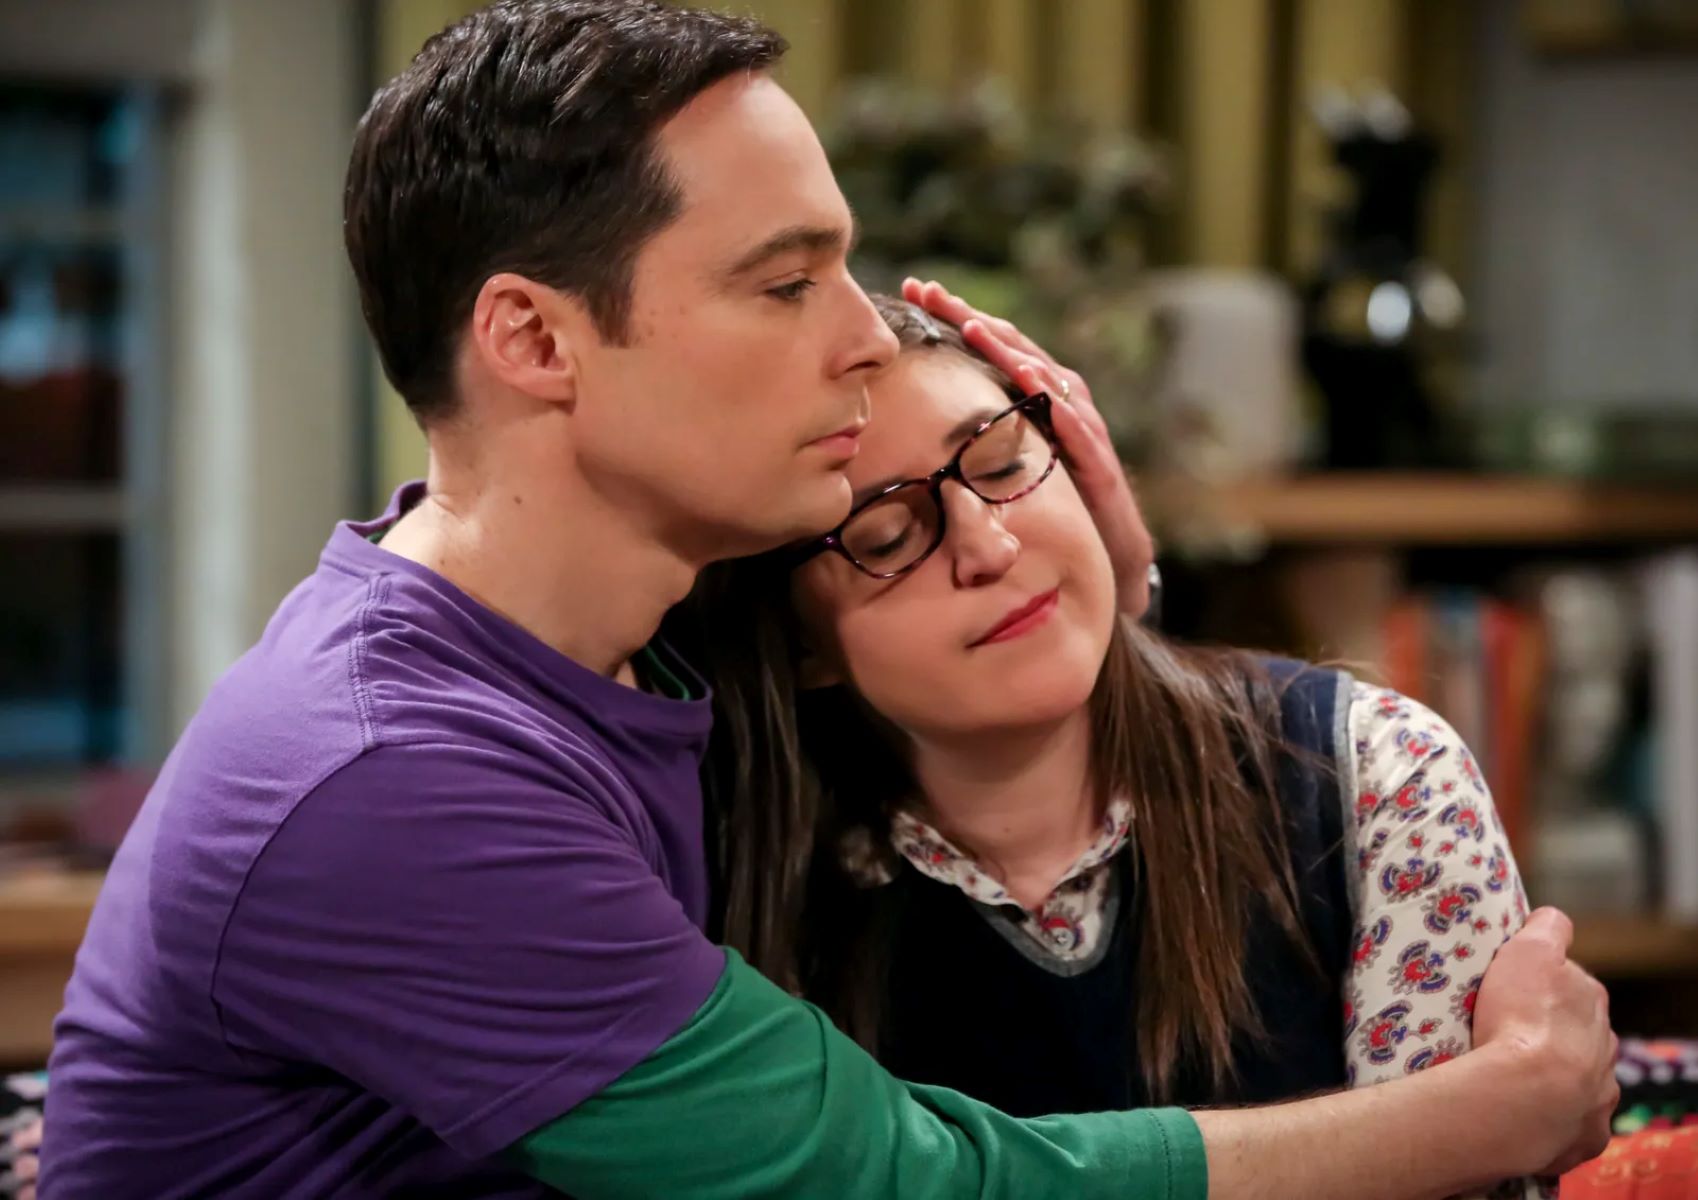 The Surprising Inspiration Behind Sheldon Cooper On ‘The Big Bang Theory’